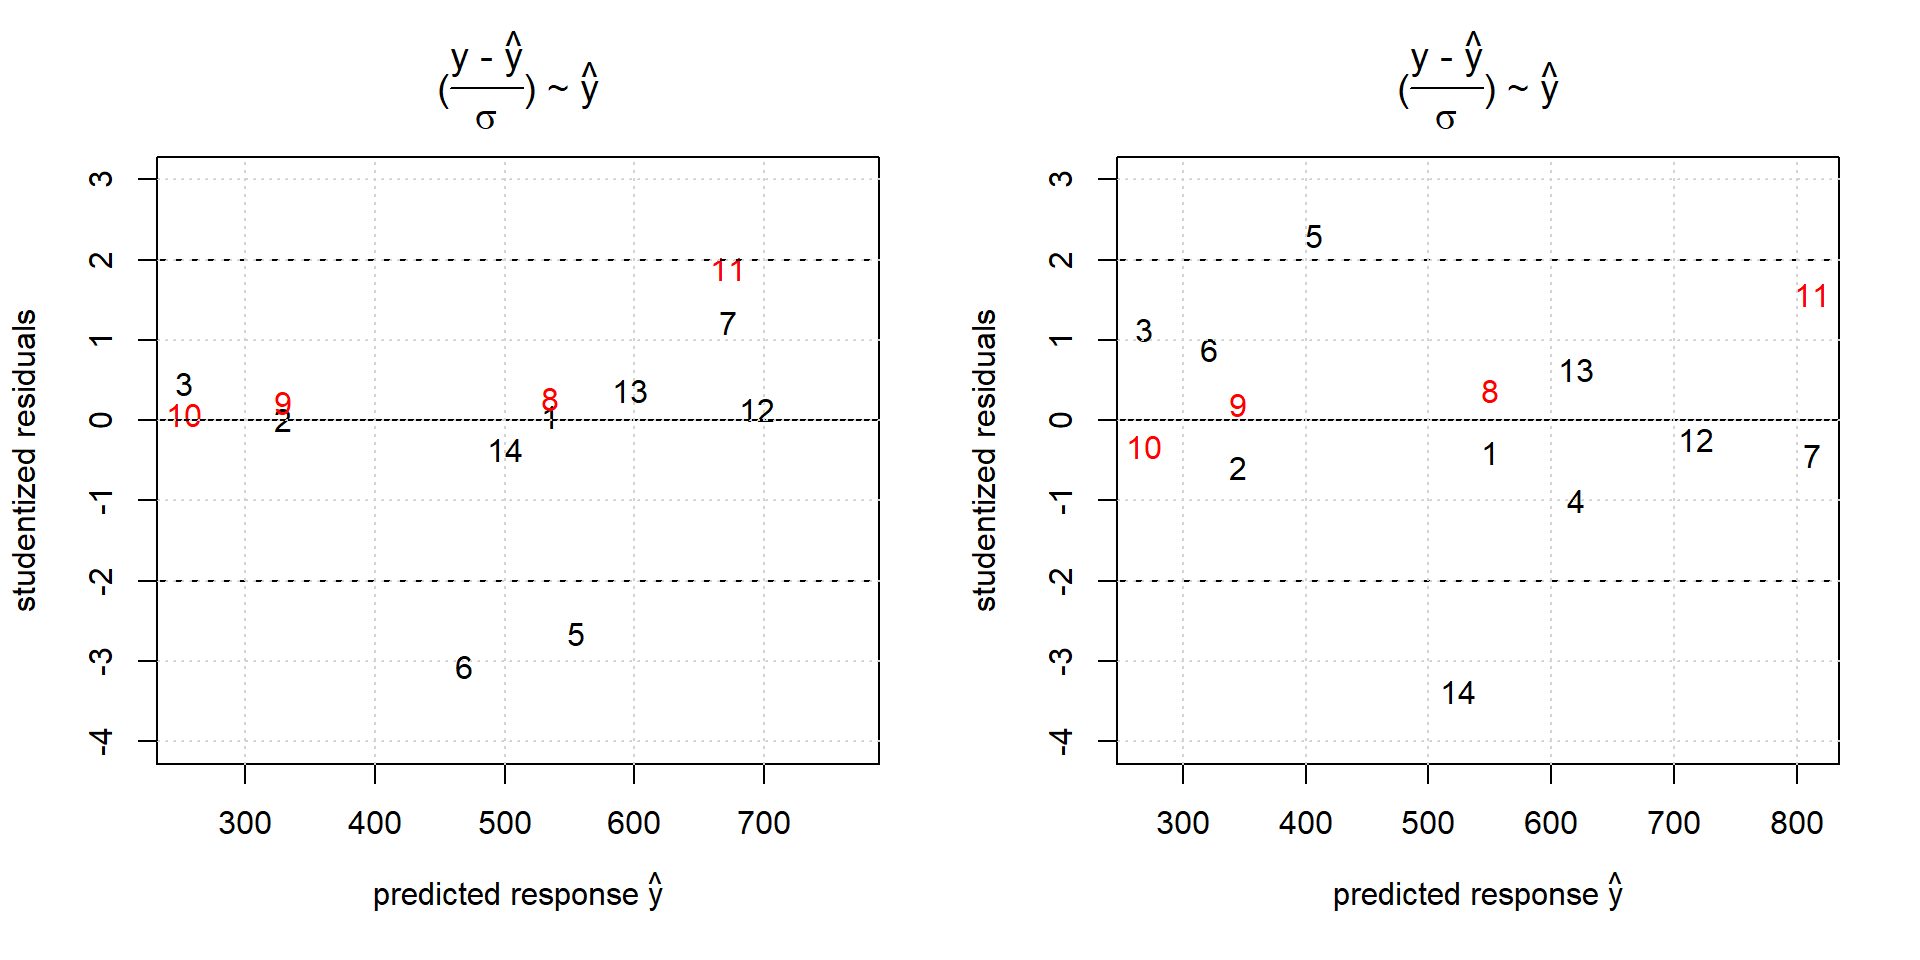 Studentized residuals versus model predictions from quadratic (left panel) and reduced cubic Scheffe models of the etching data. The replicate pairs (3,10), (2,9), (8,1) and (7,11) are better described within relication error by the cubic model (right panel) compared with the quadratic model (left panel).